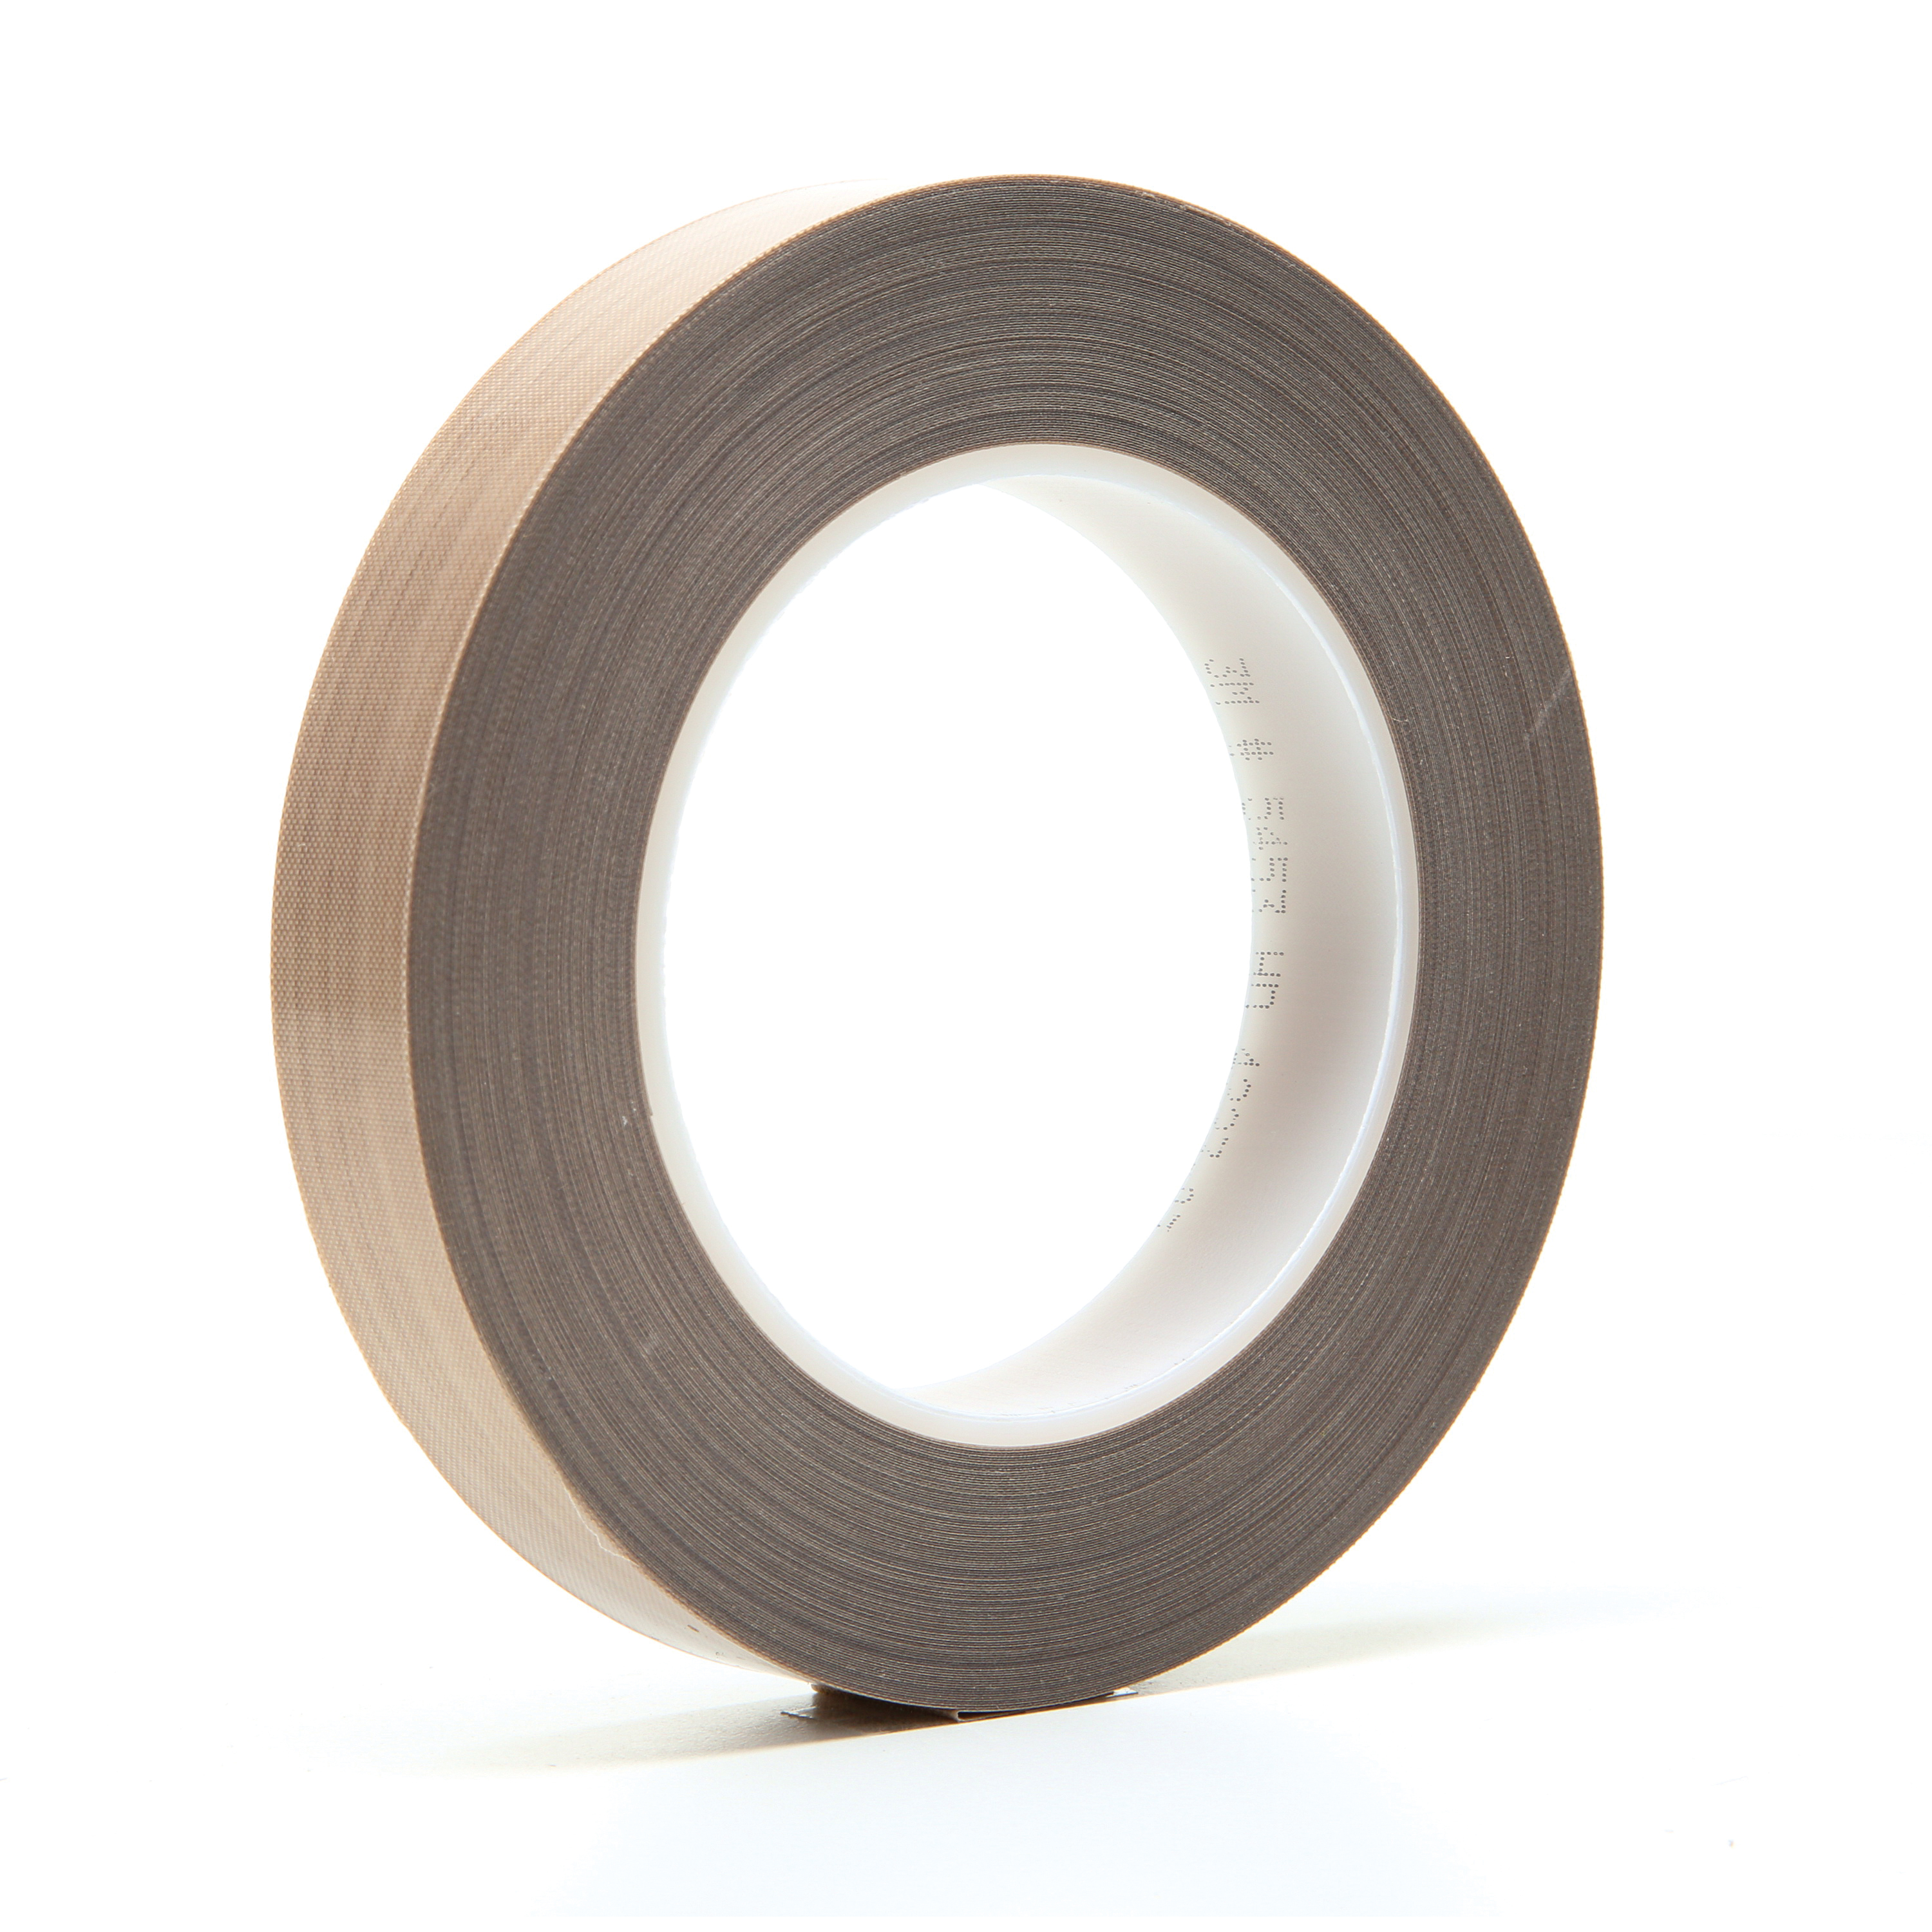 3M™ 021200-16159 Pressure Sensitive Glass Cloth Tape, 36 yd L x 3/4 in W, 8.2 mil THK, Silicon Adhesive, Woven Glass Cloth Impregnated with PTFE Backing, Brown